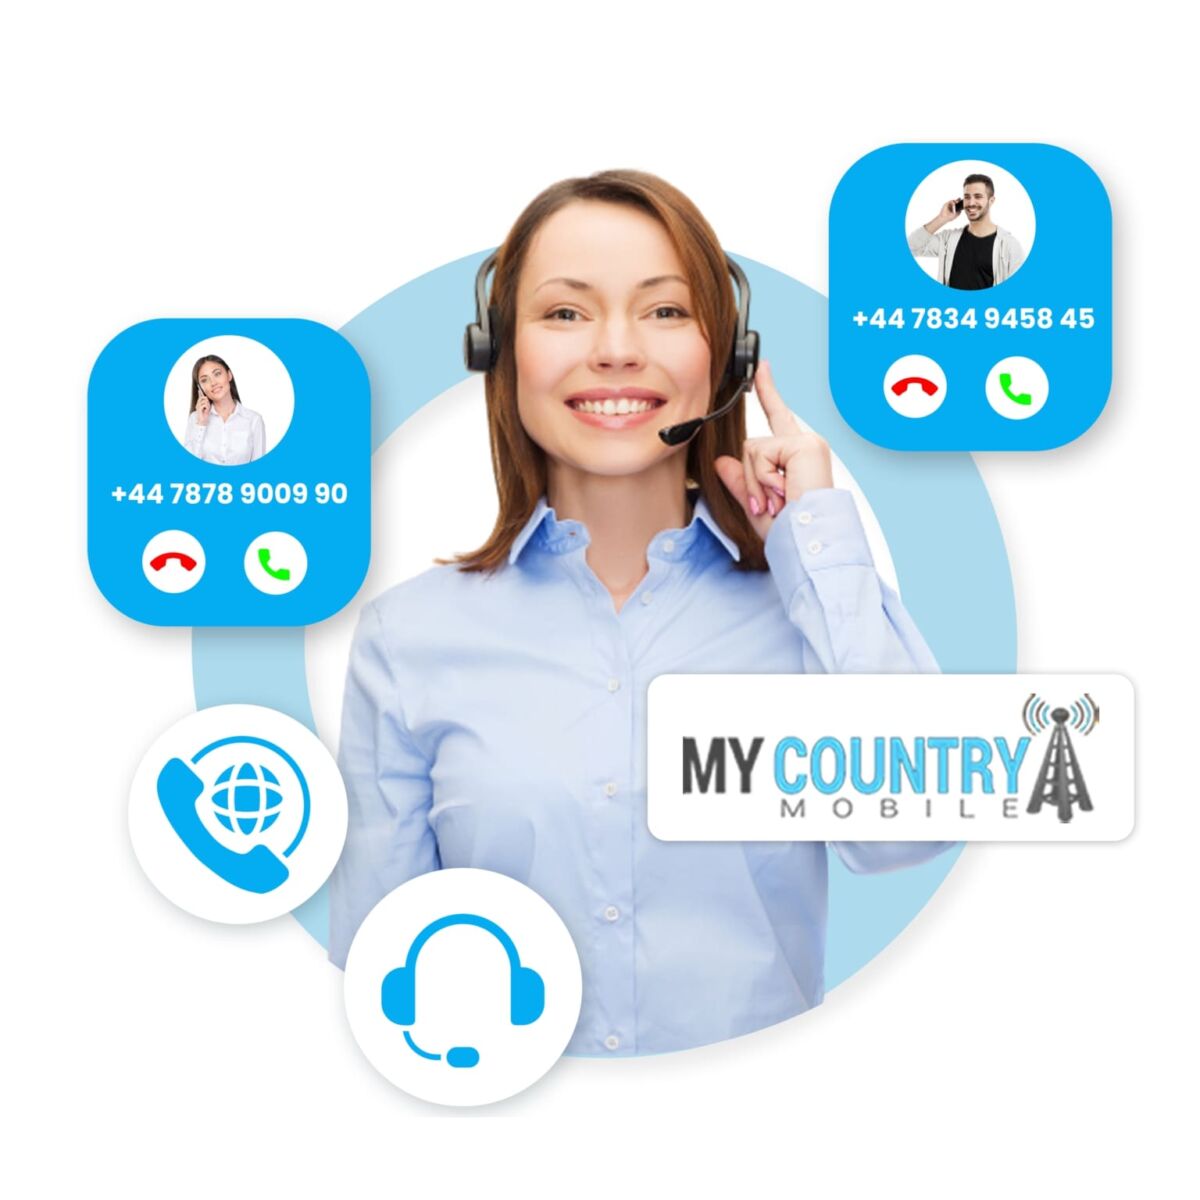 My Country Mobile + Act 365 Integration